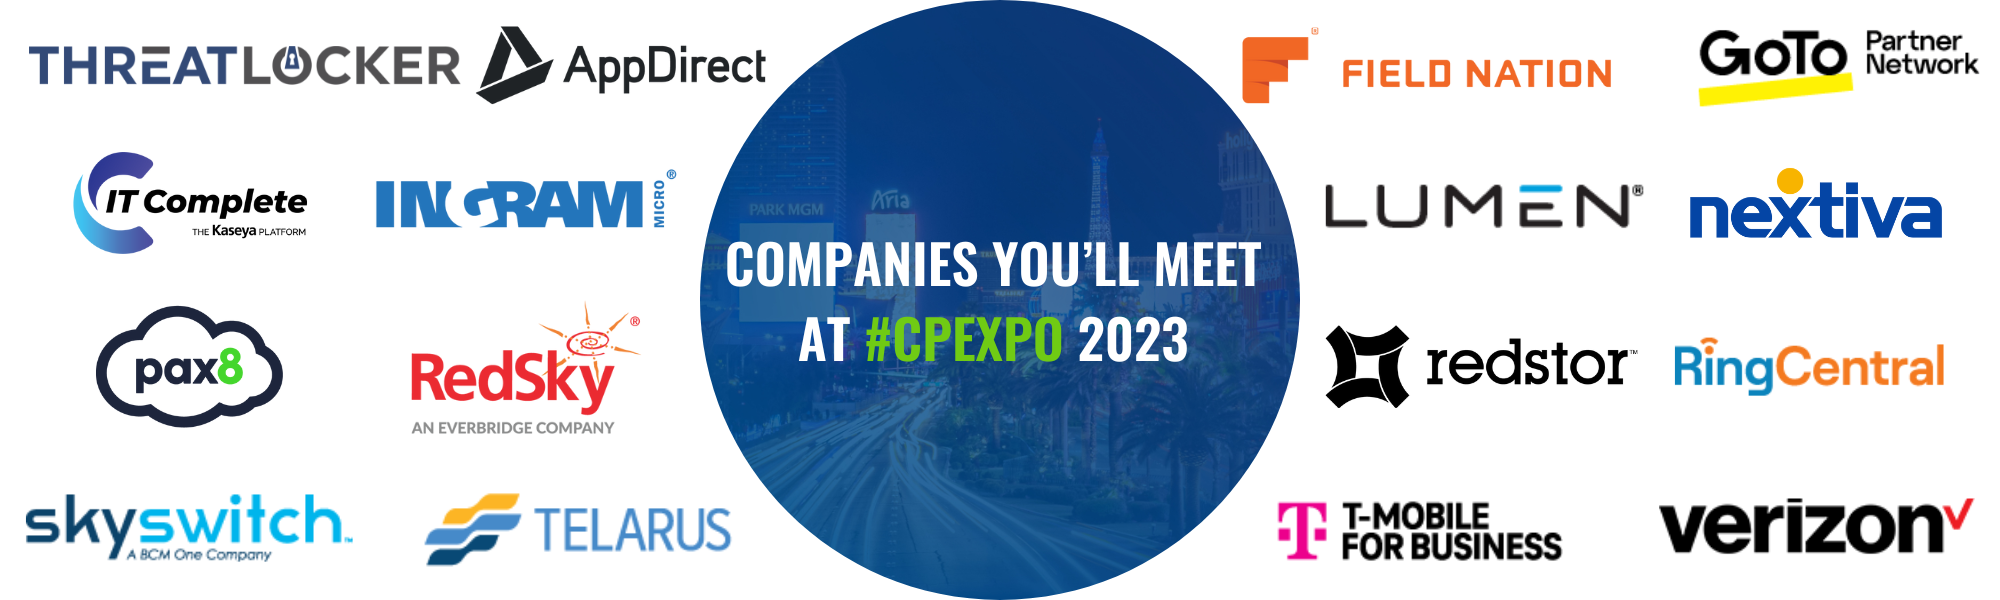 Companies you'll meet at Channel Partners Conference & Expo 2023